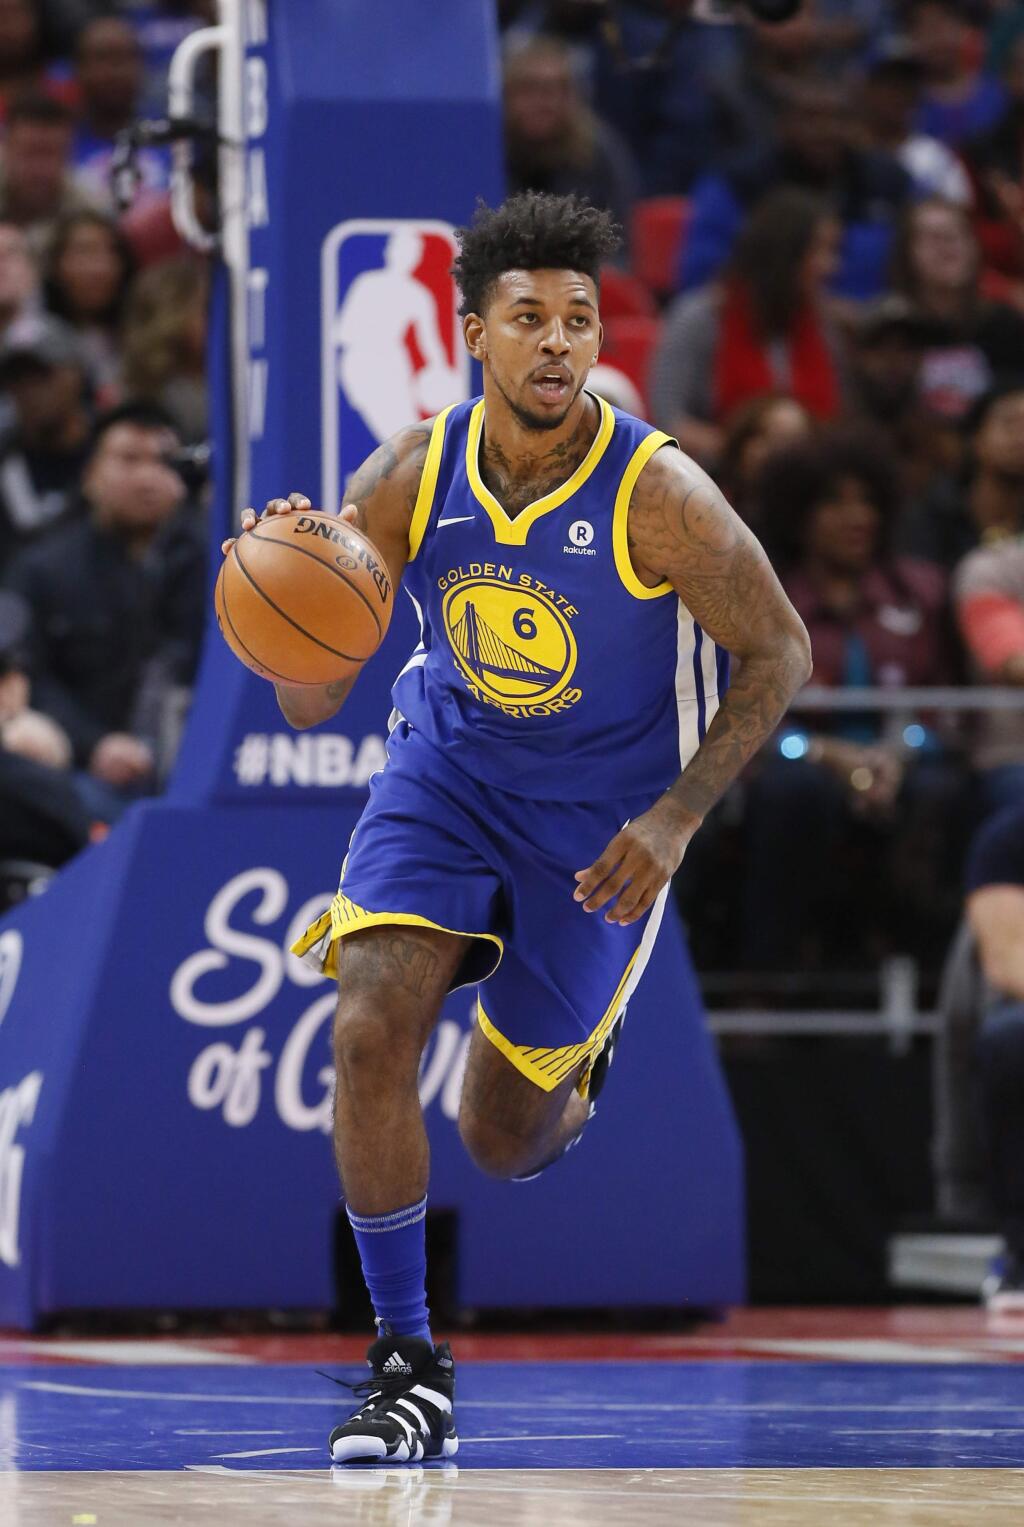 Golden State Warriors guard Nick Young brings the ball up court against the Detroit Pistons during the second quarter Friday, Dec. 8, 2017, in Detroit. (AP Photo/Duane Burleson)